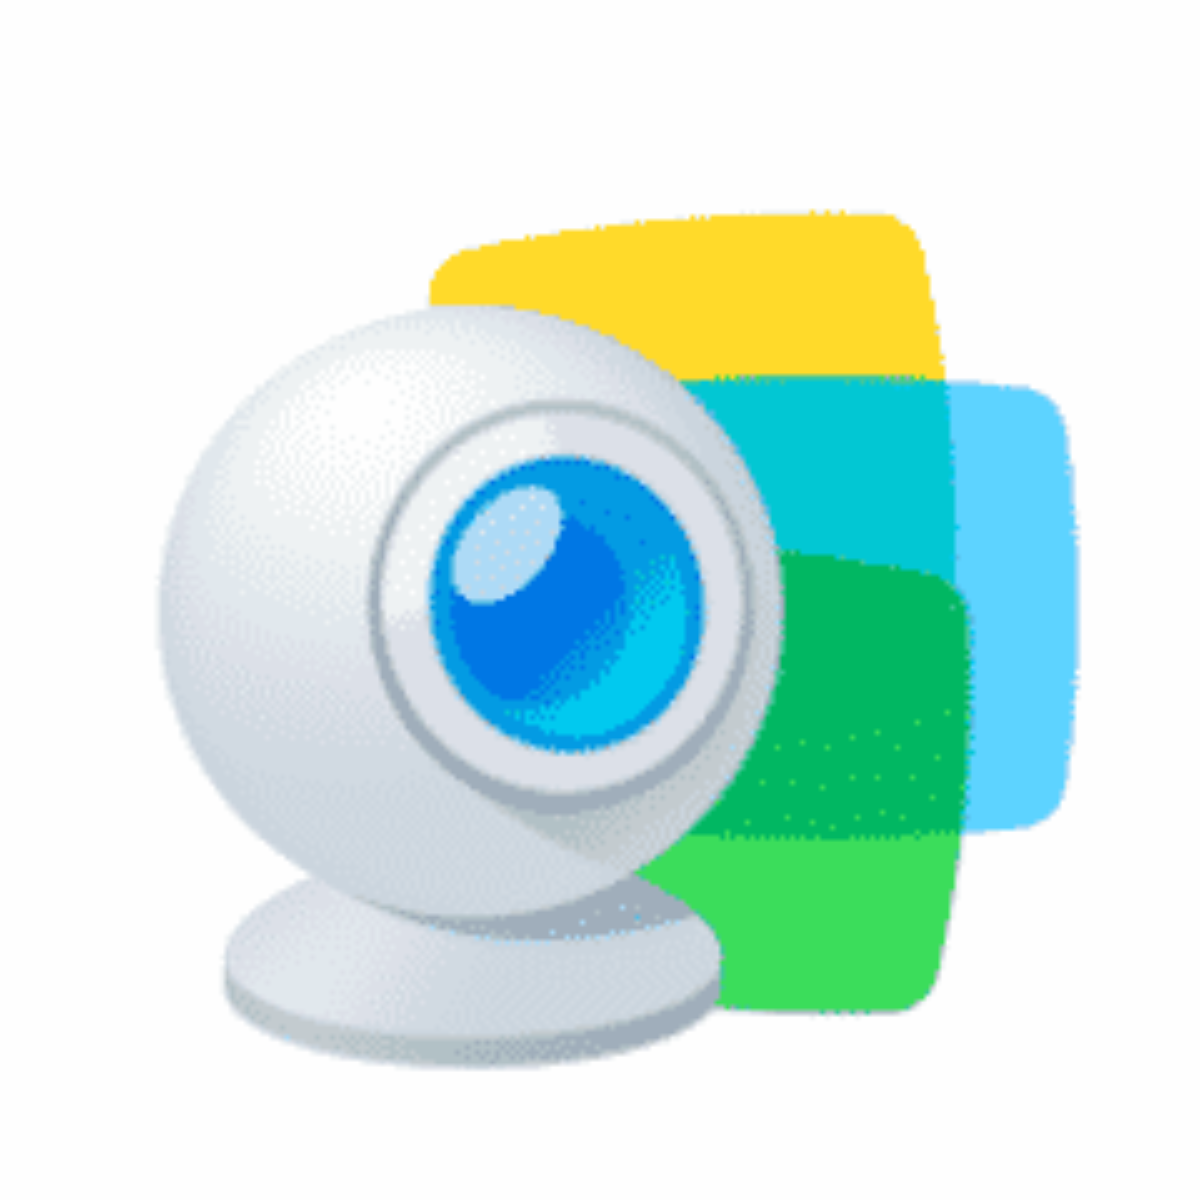 ManyCam-for-windows-1200x1200.png